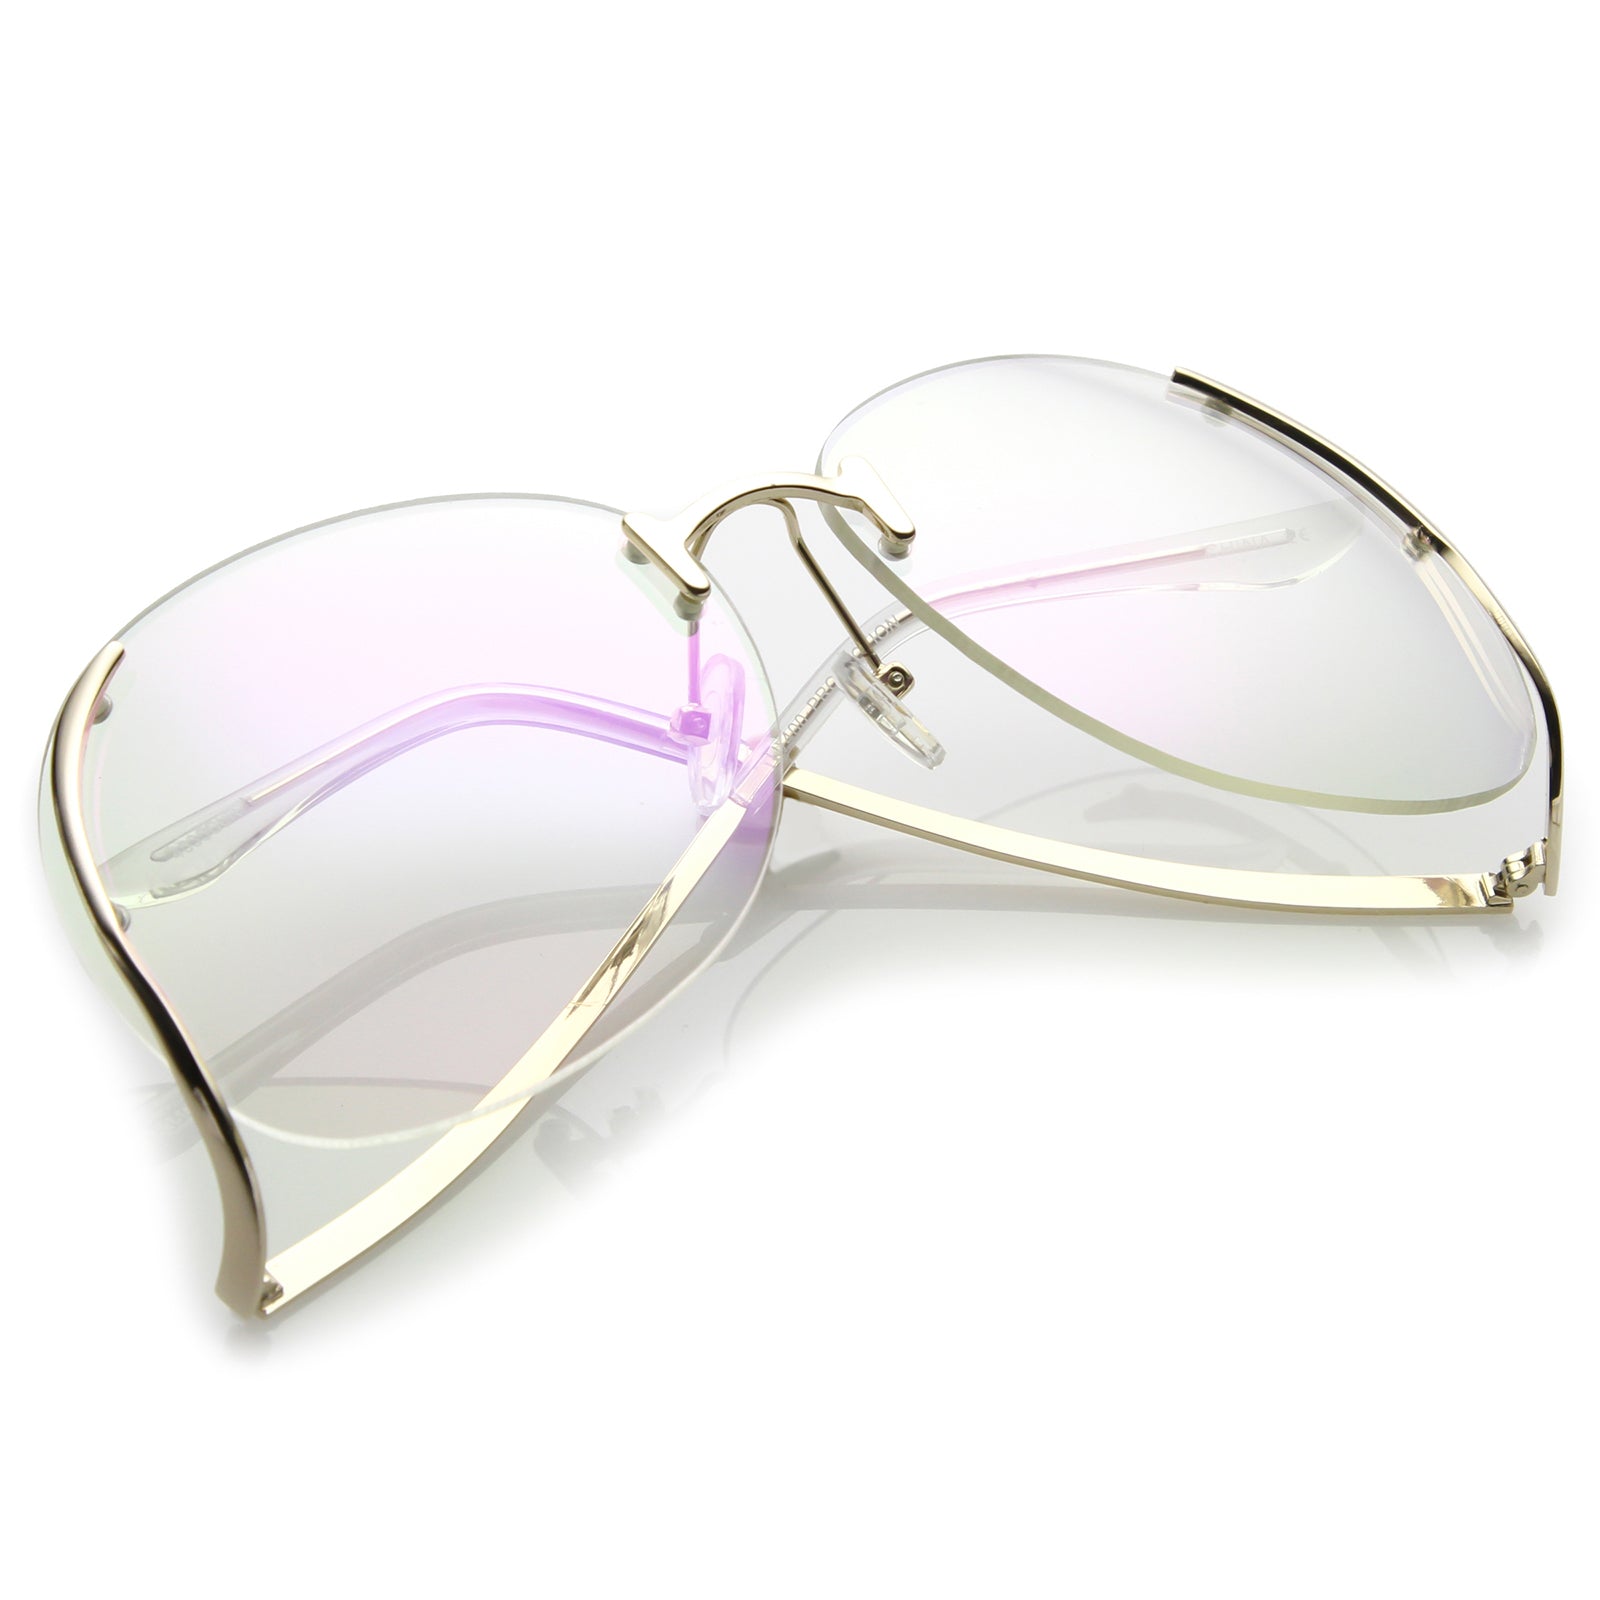 Fashion Oversized Round Sunglasses Women Metal Bar Rimless Clear Shades  Glasses